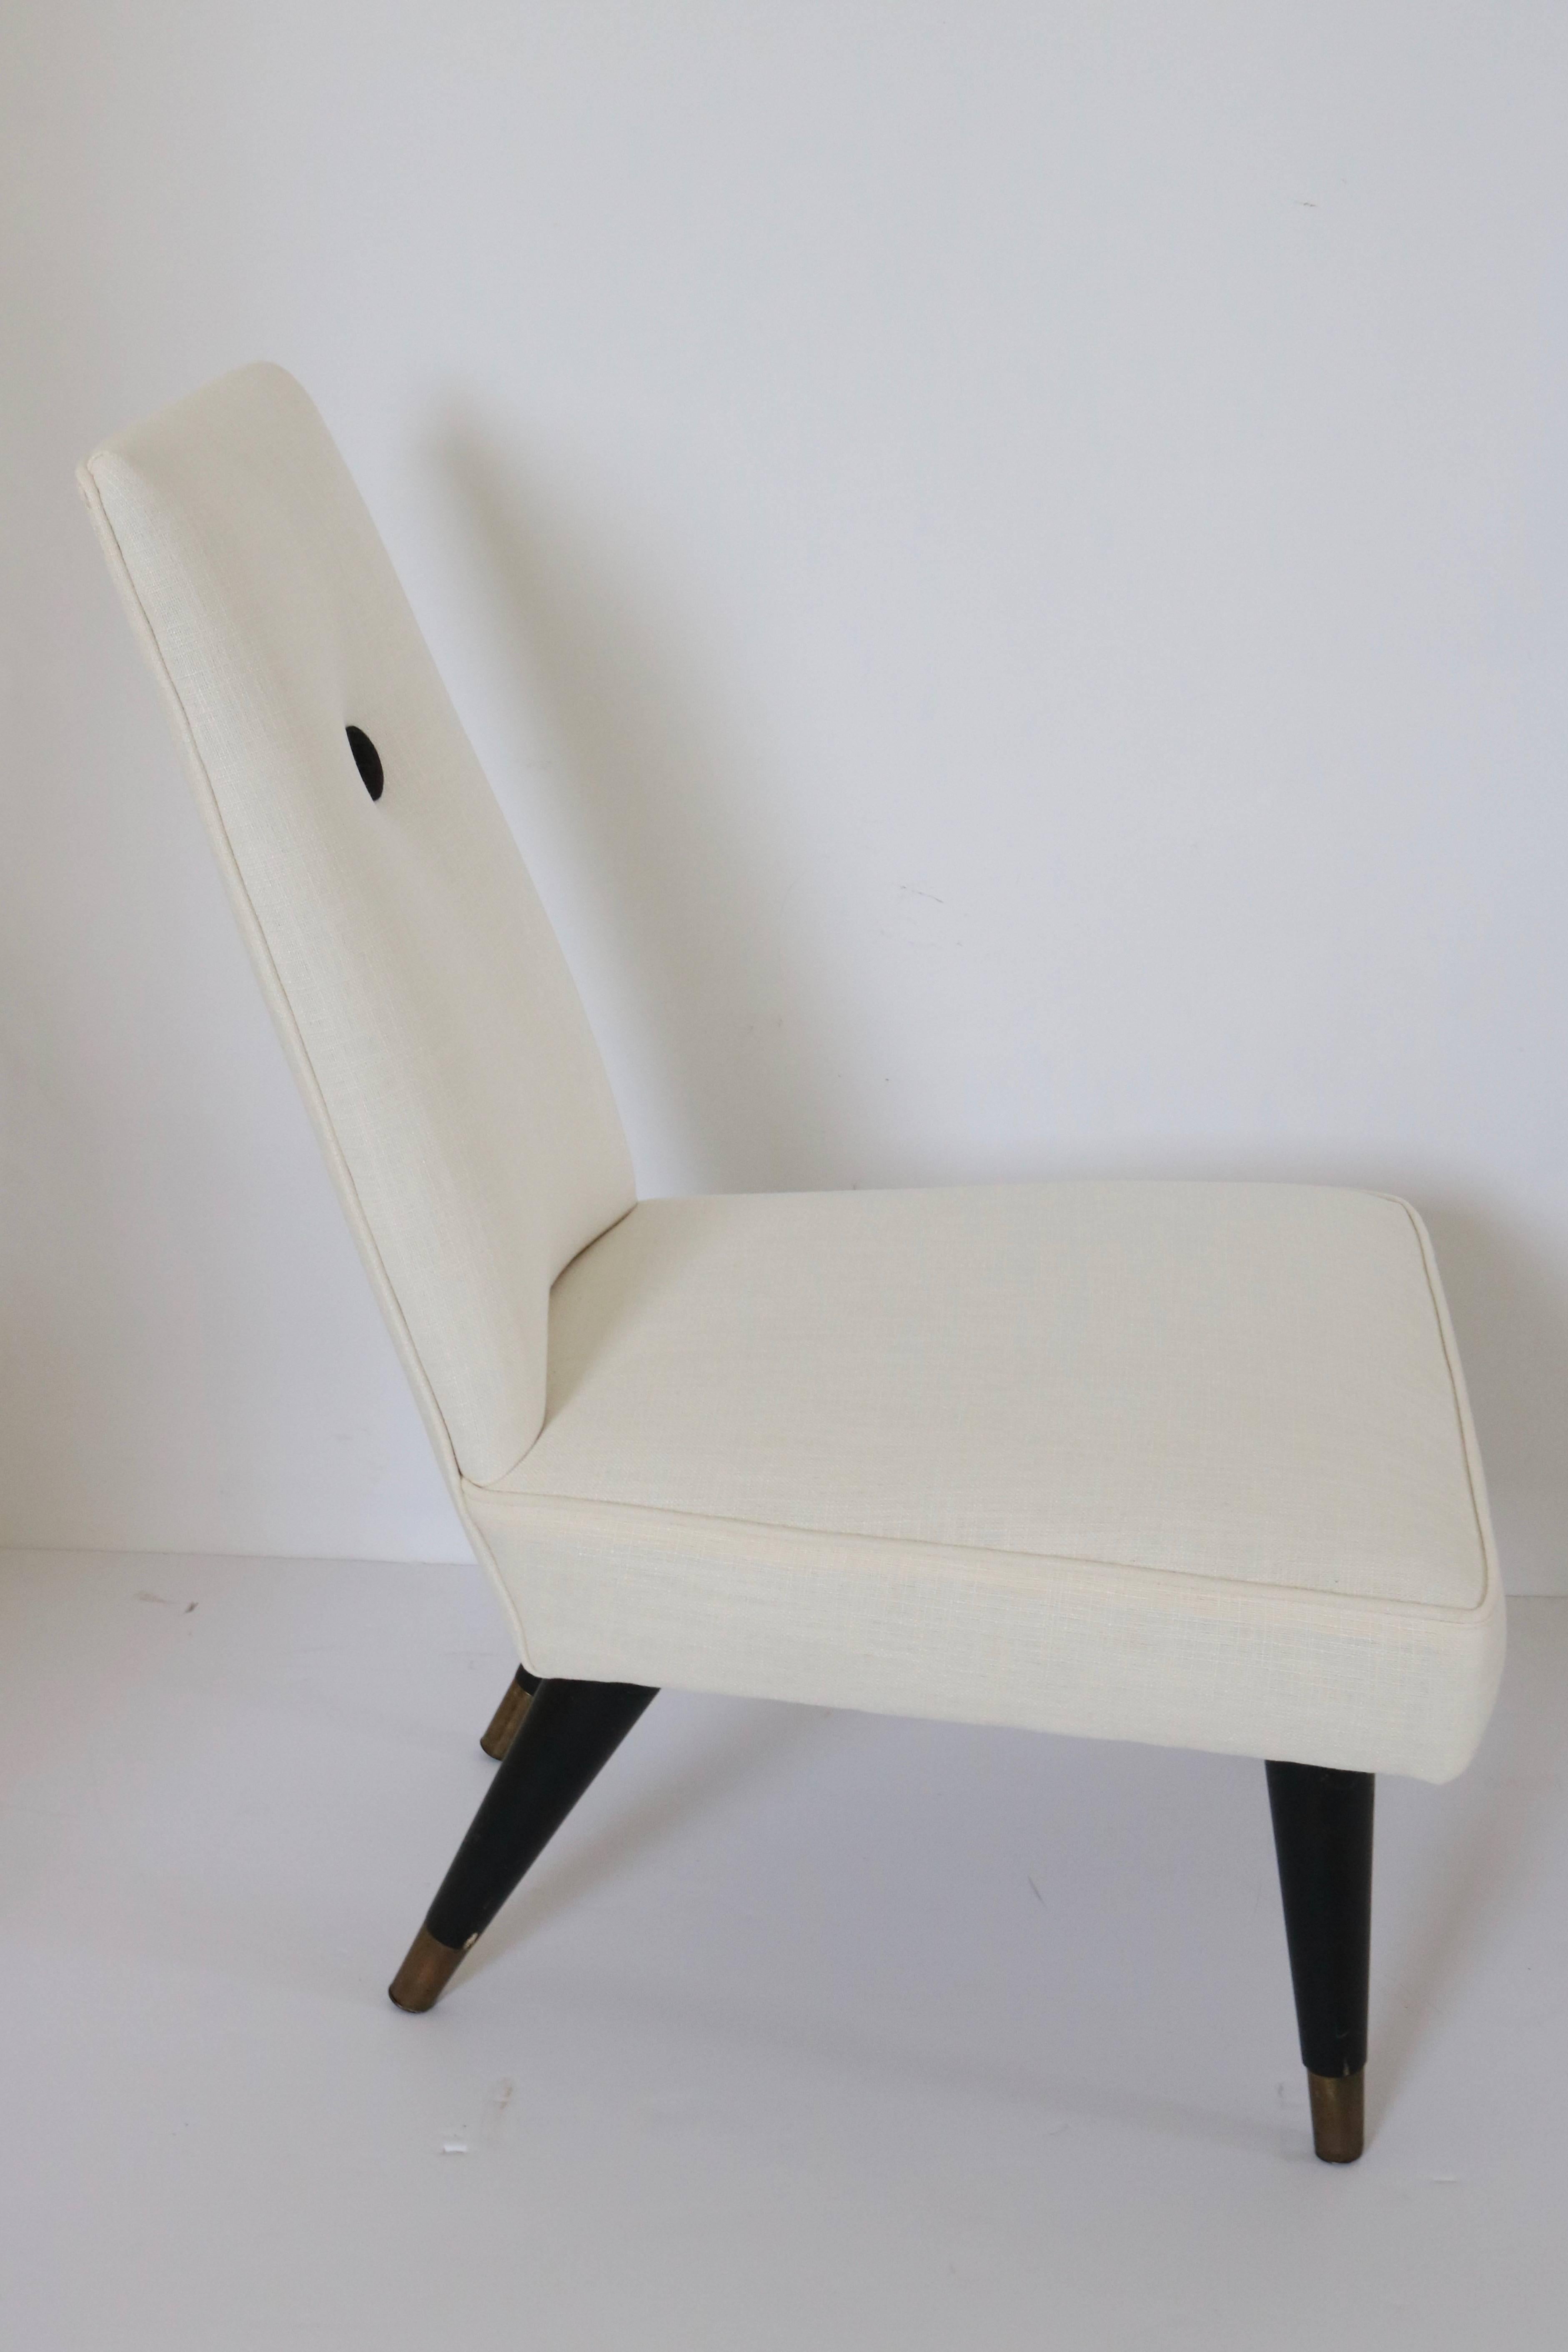 Italian Pair of Mid-Century Modern Slipper Chairs in White and Black Upholstery